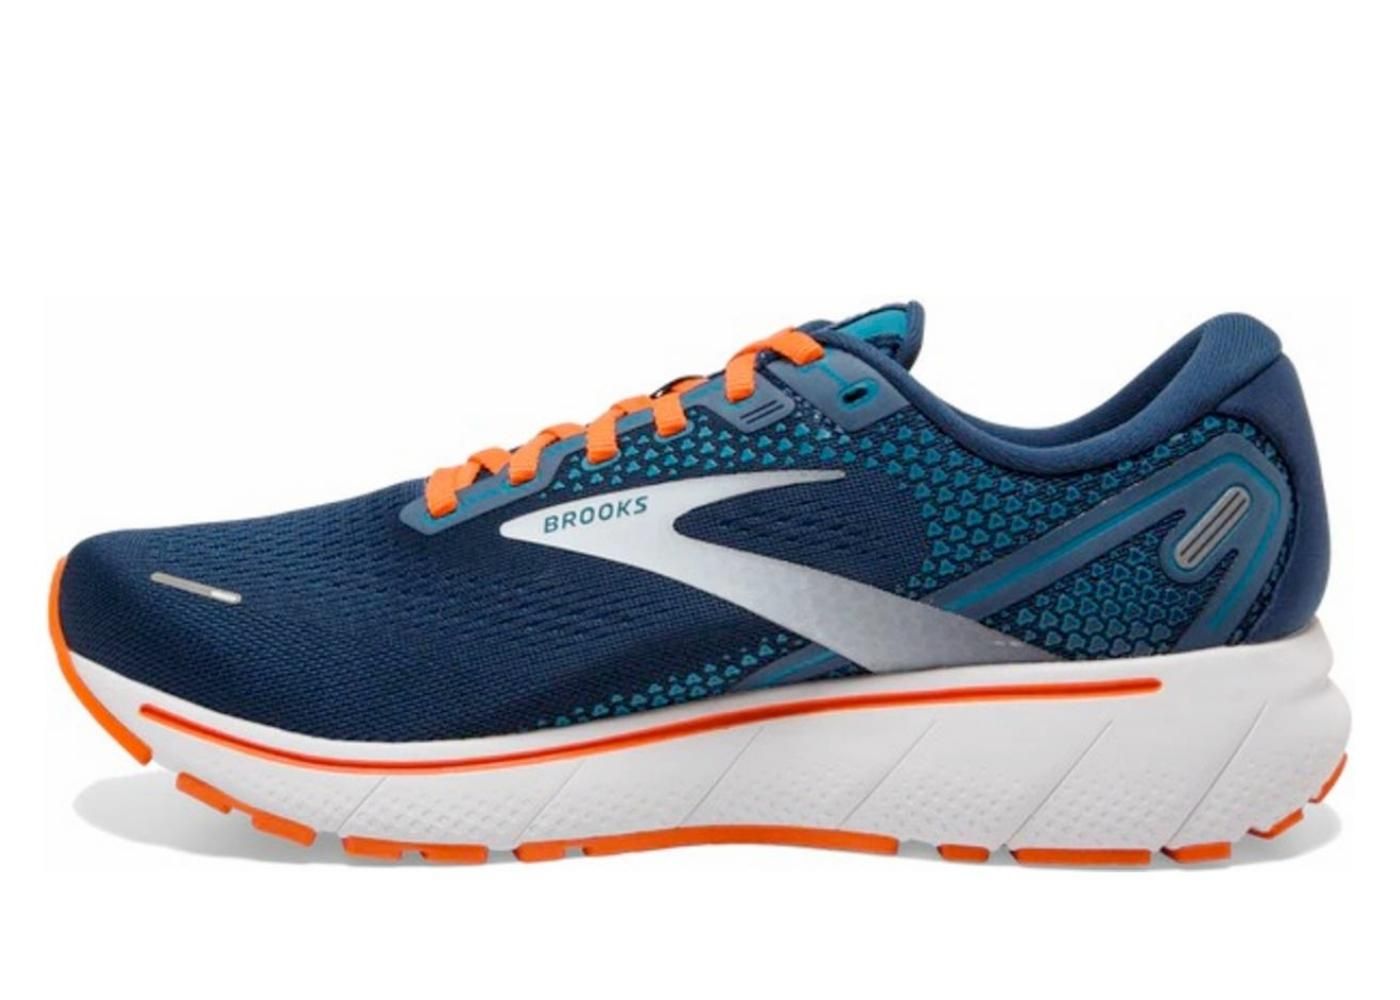 The Best Running Shoes of 2022